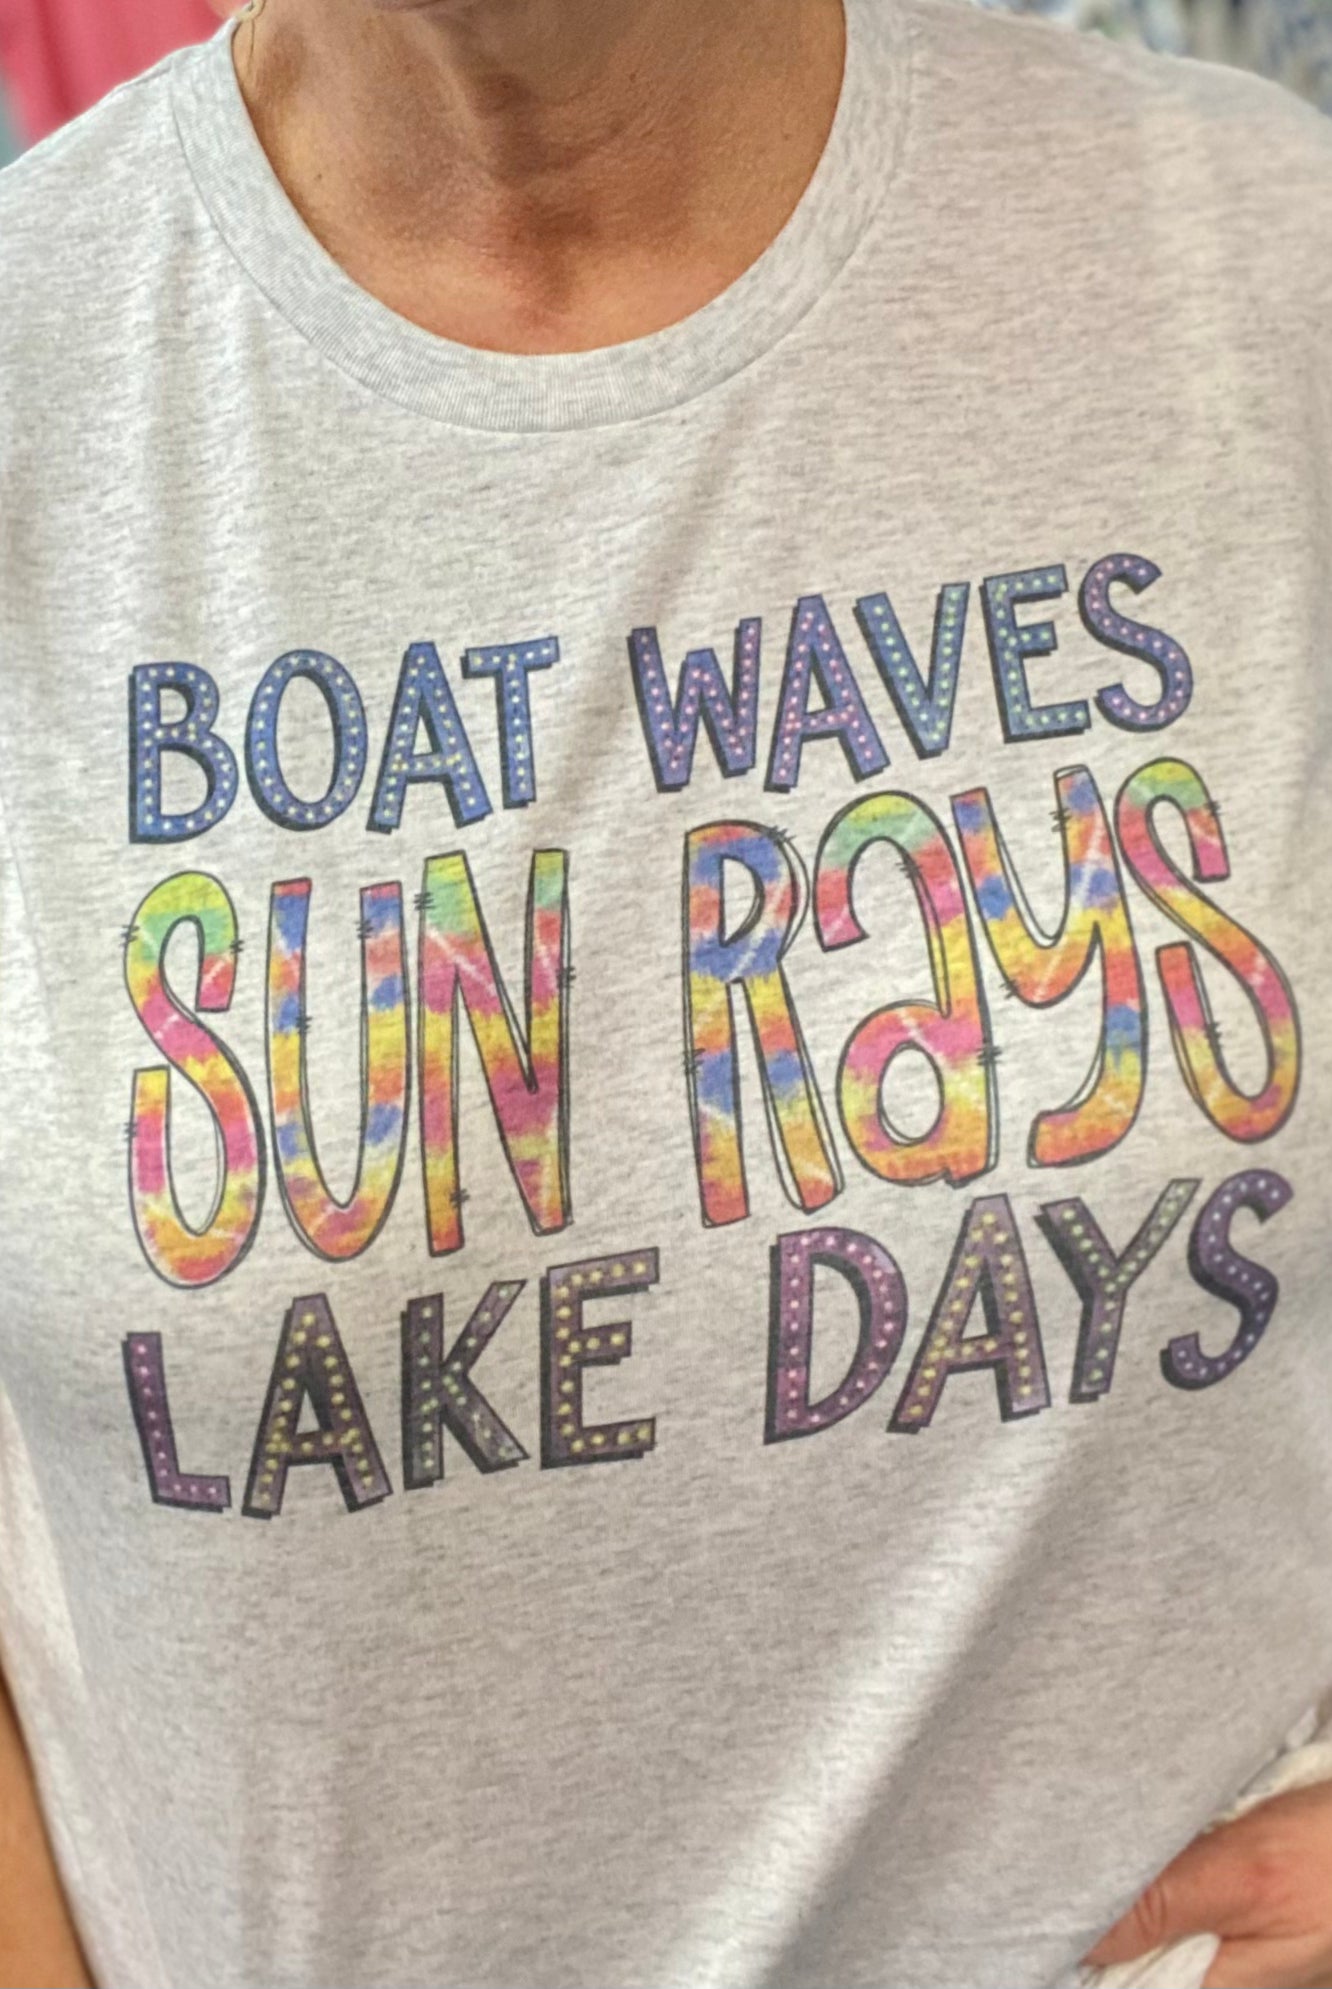 Boat Waves Lake Days Graphic Tee - Graphic Tee -Jimberly's Boutique-Olive Branch-Mississippi